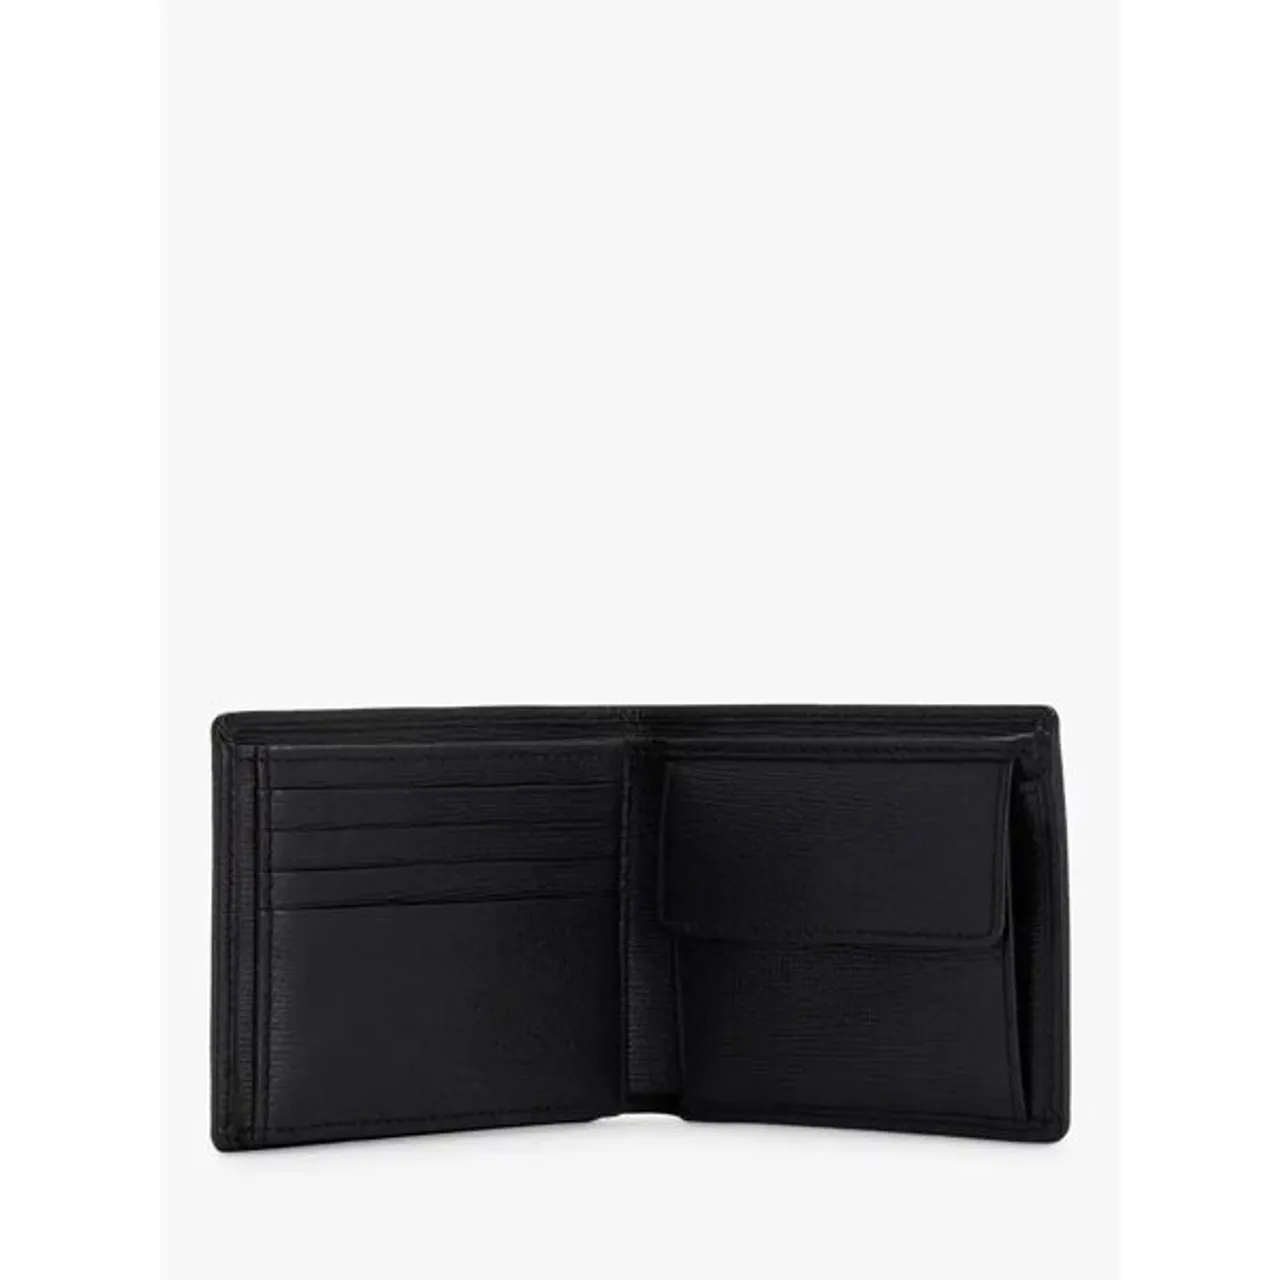 Hugo Boss BOSS Gallery Trifold Tumbled Leather Wallet, Black - Black - Male